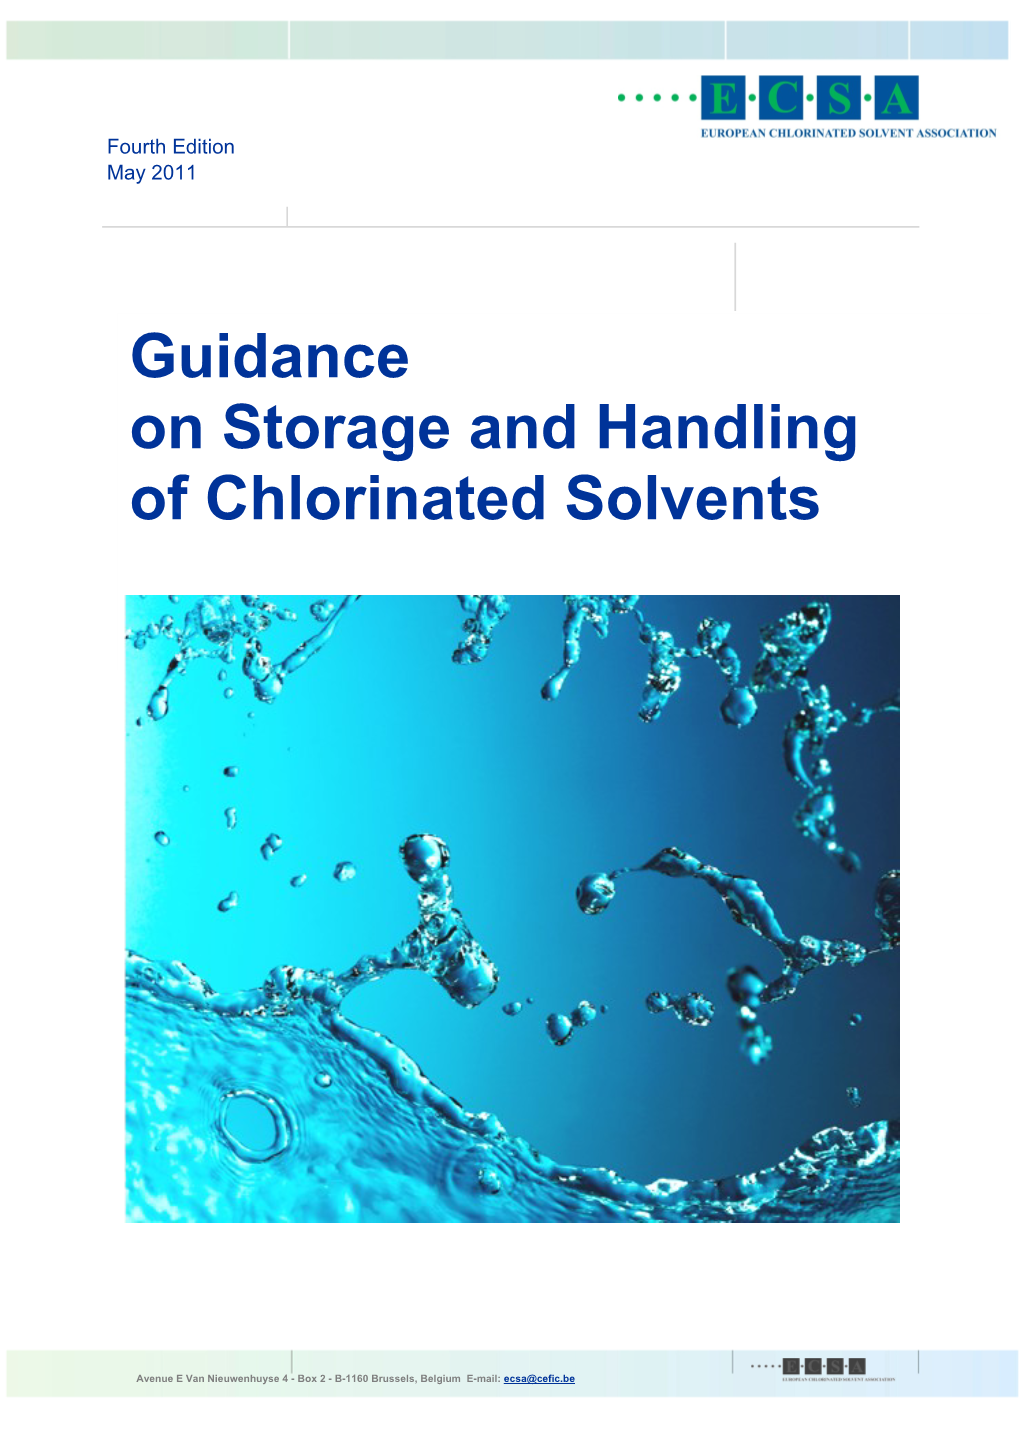 Guidance on Storage and Handling of Chlorinated Solvents